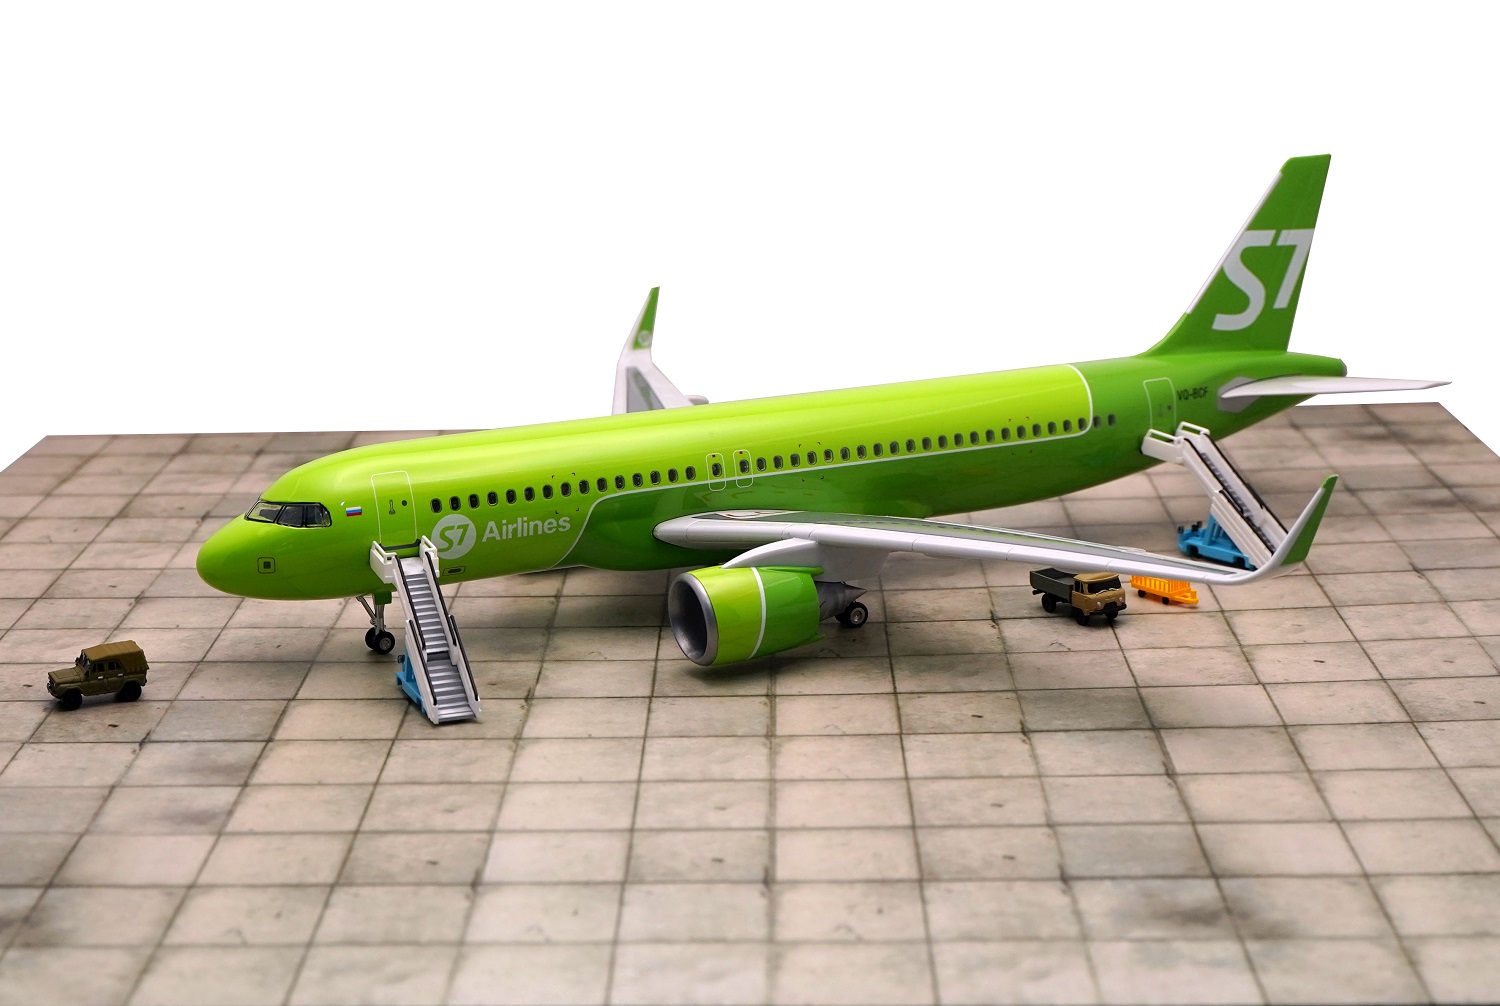   Airbus A320 Neo,  S7 Airlines .    .  # 8 hobbyplus.ru